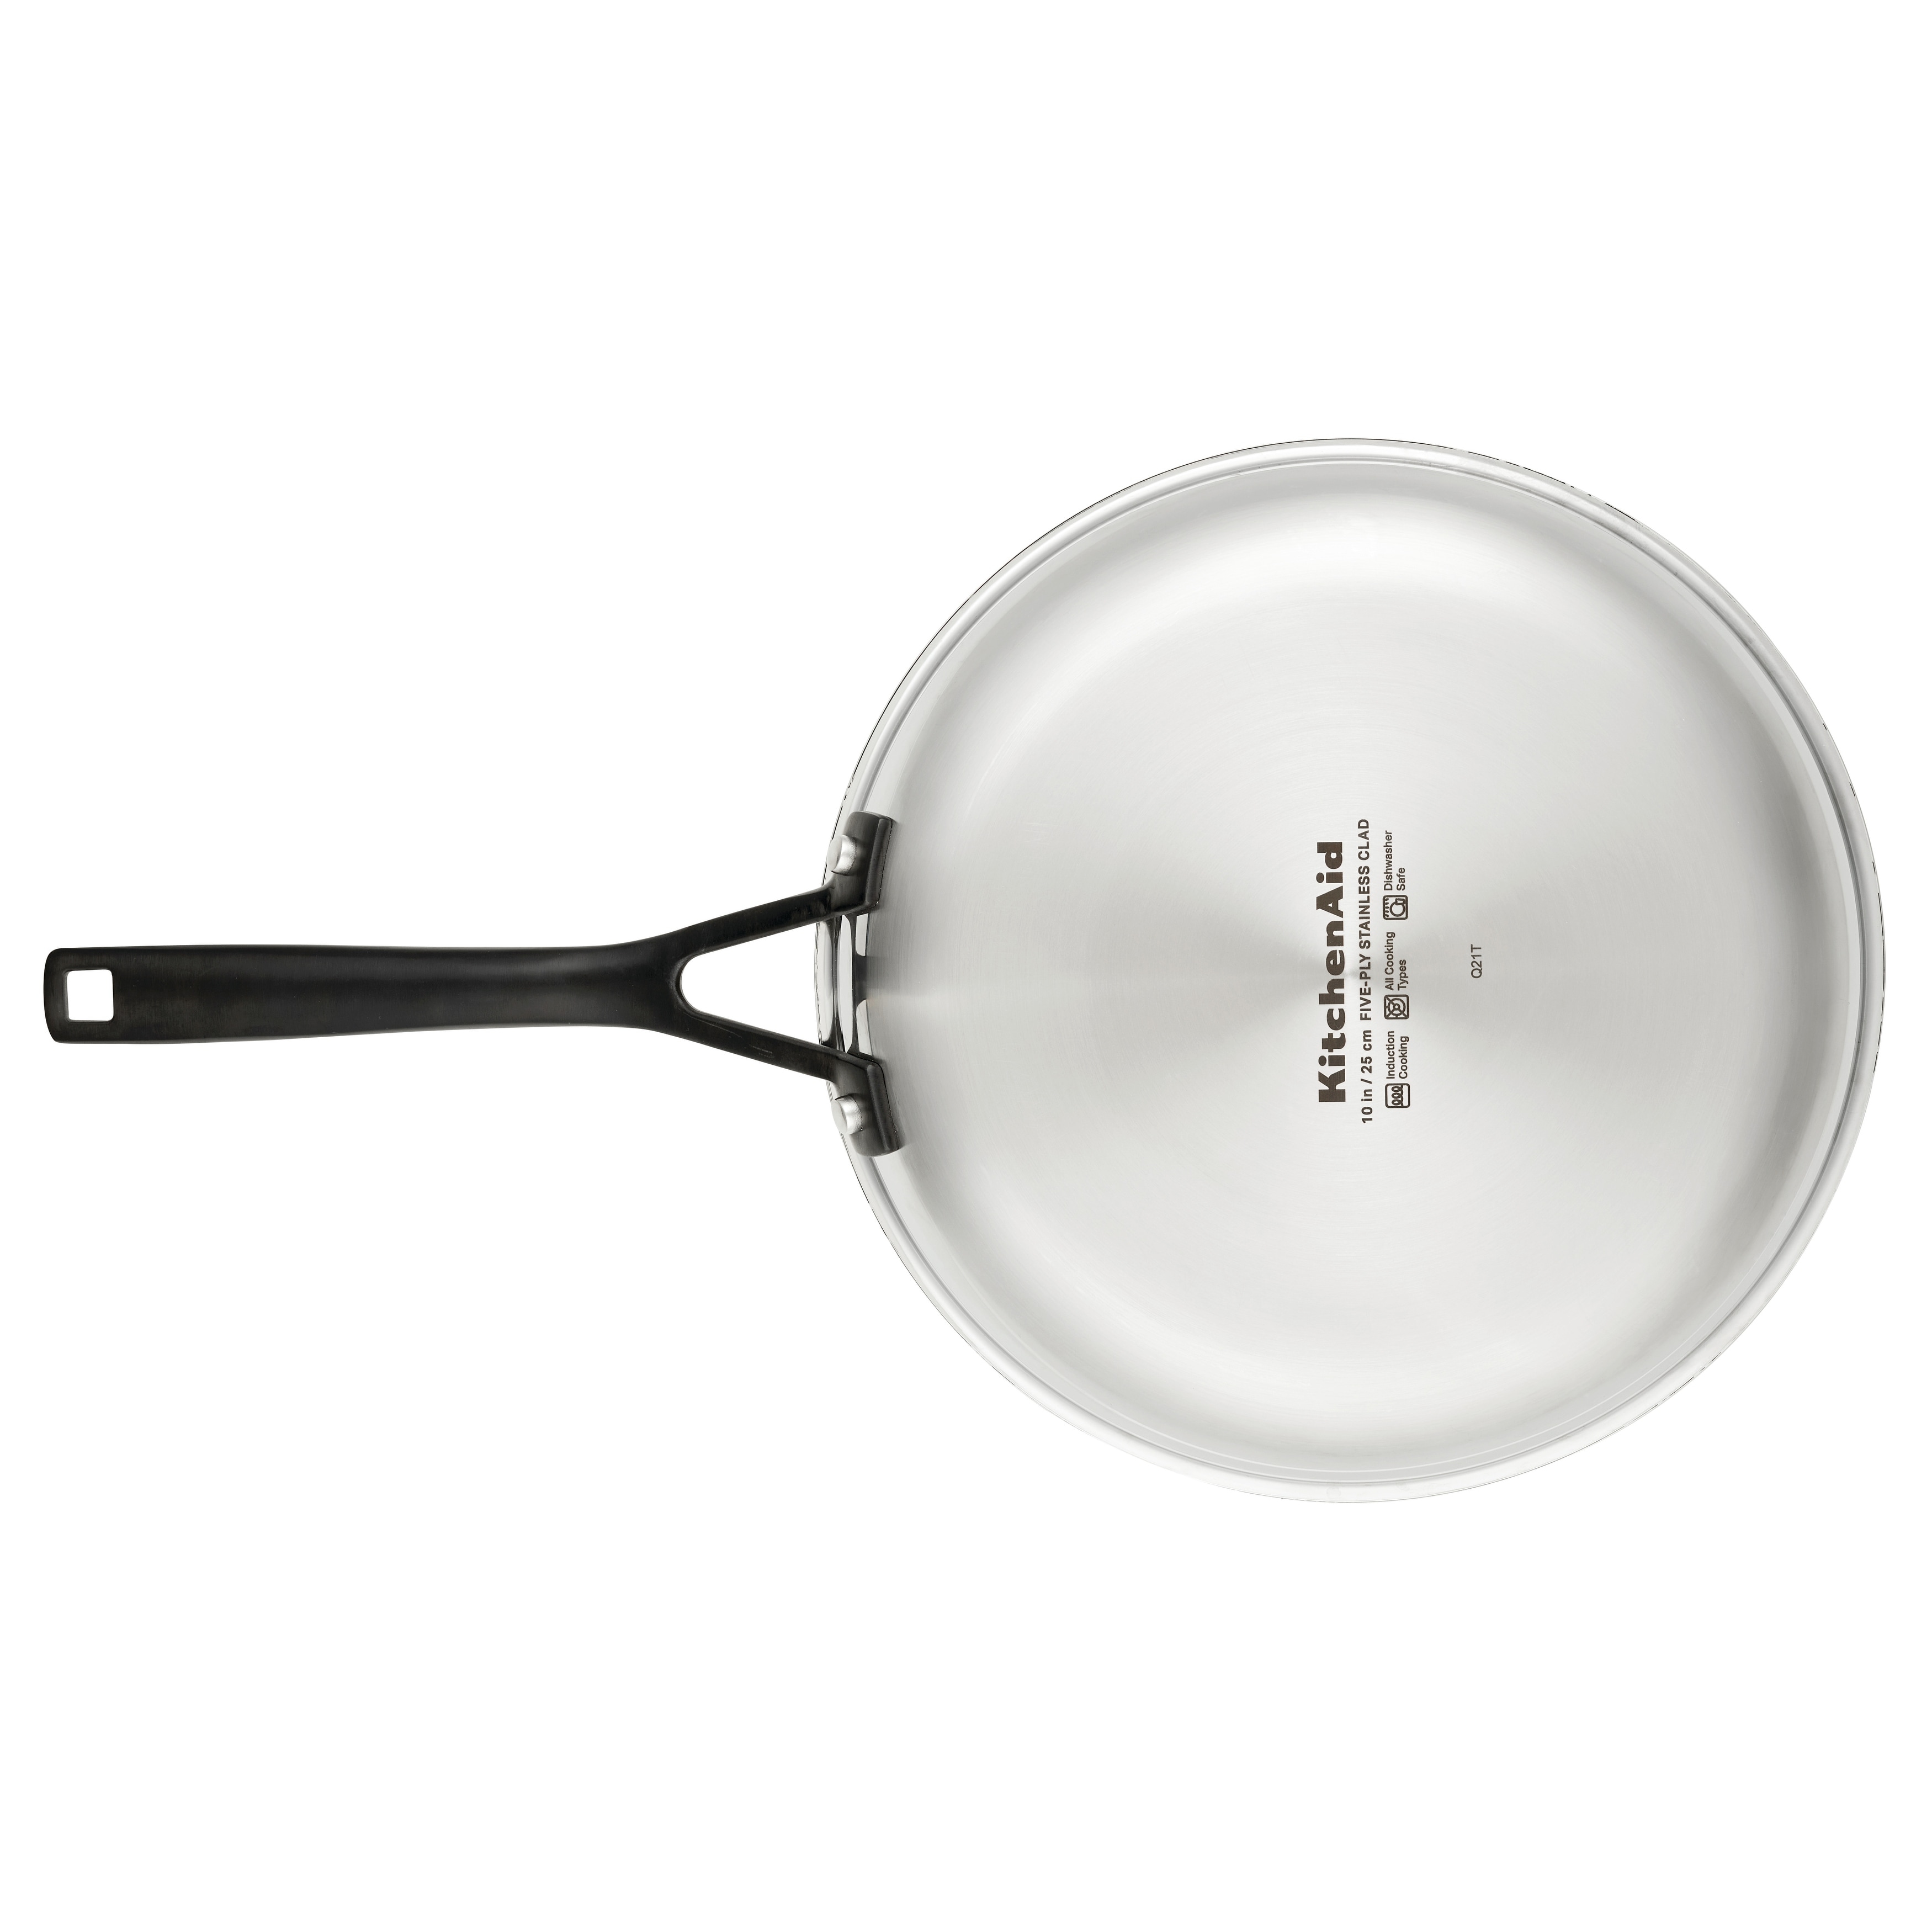 https://ak1.ostkcdn.com/images/products/is/images/direct/a47aff8de6ff2119cc400f6e7be0e8cf4814b3e1/KitchenAid-5-Ply-Clad-Stainless-Steel-Induction-Frying-Pan%2C-10-Inch%2C-Polished-Stainless-Steel.jpg